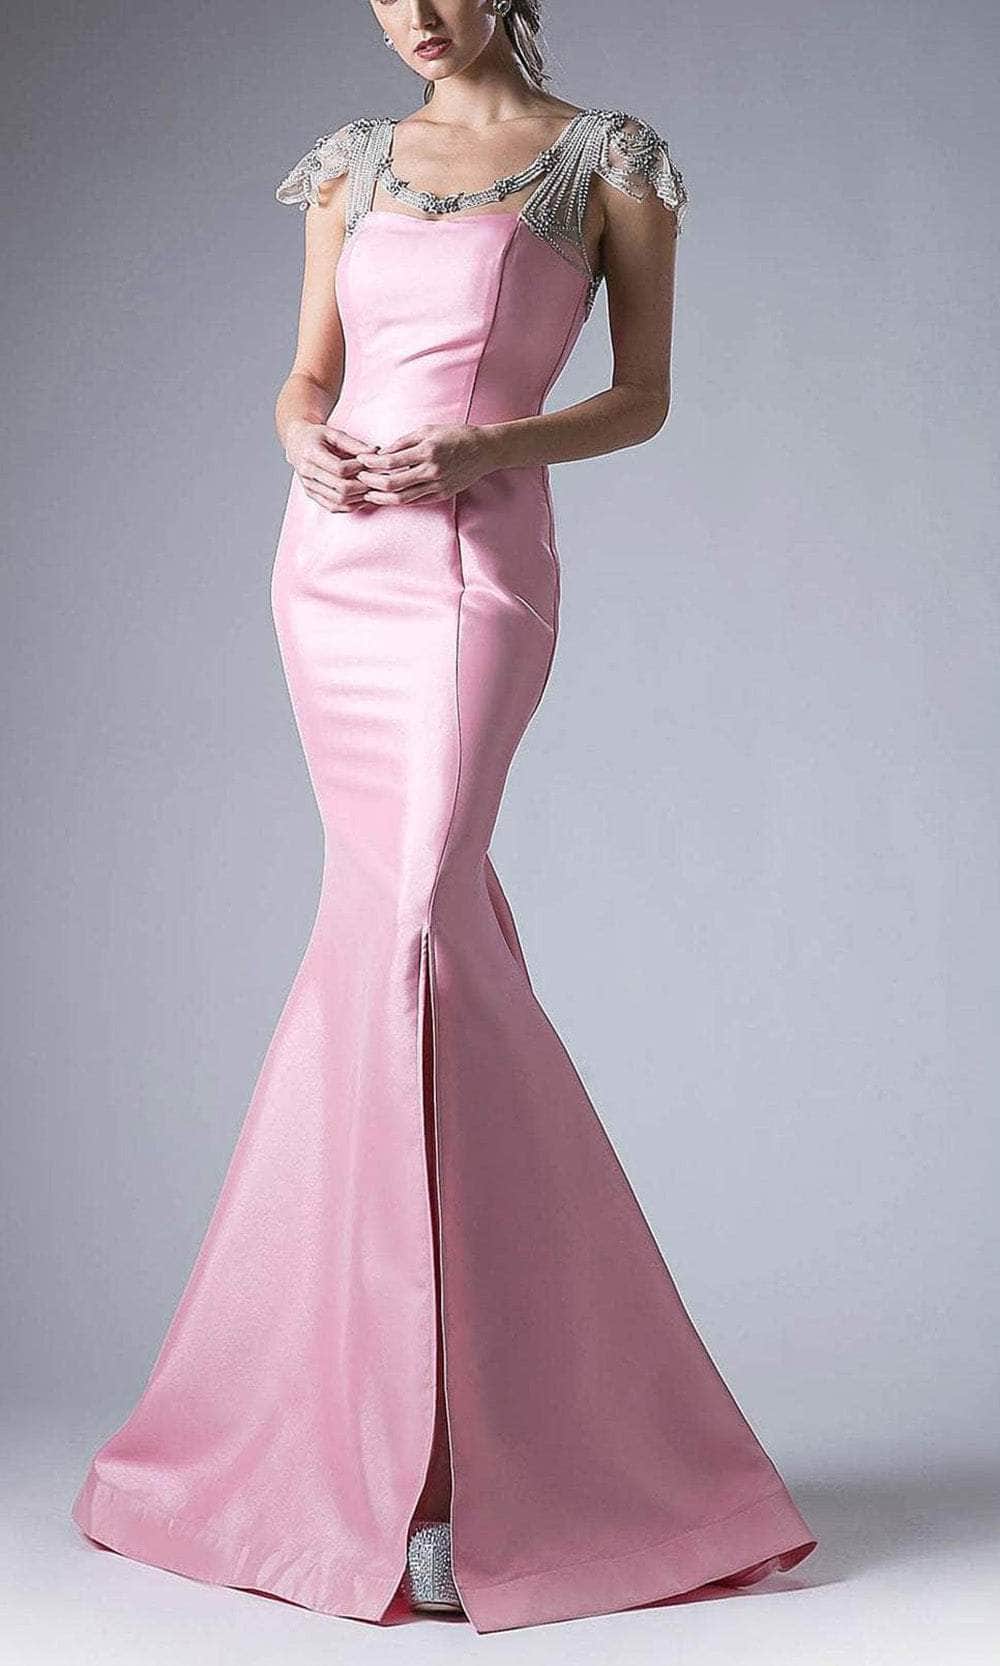 Andrea and Leo A5007 - Beaded Scoop Neck Cutout Evening Dress
